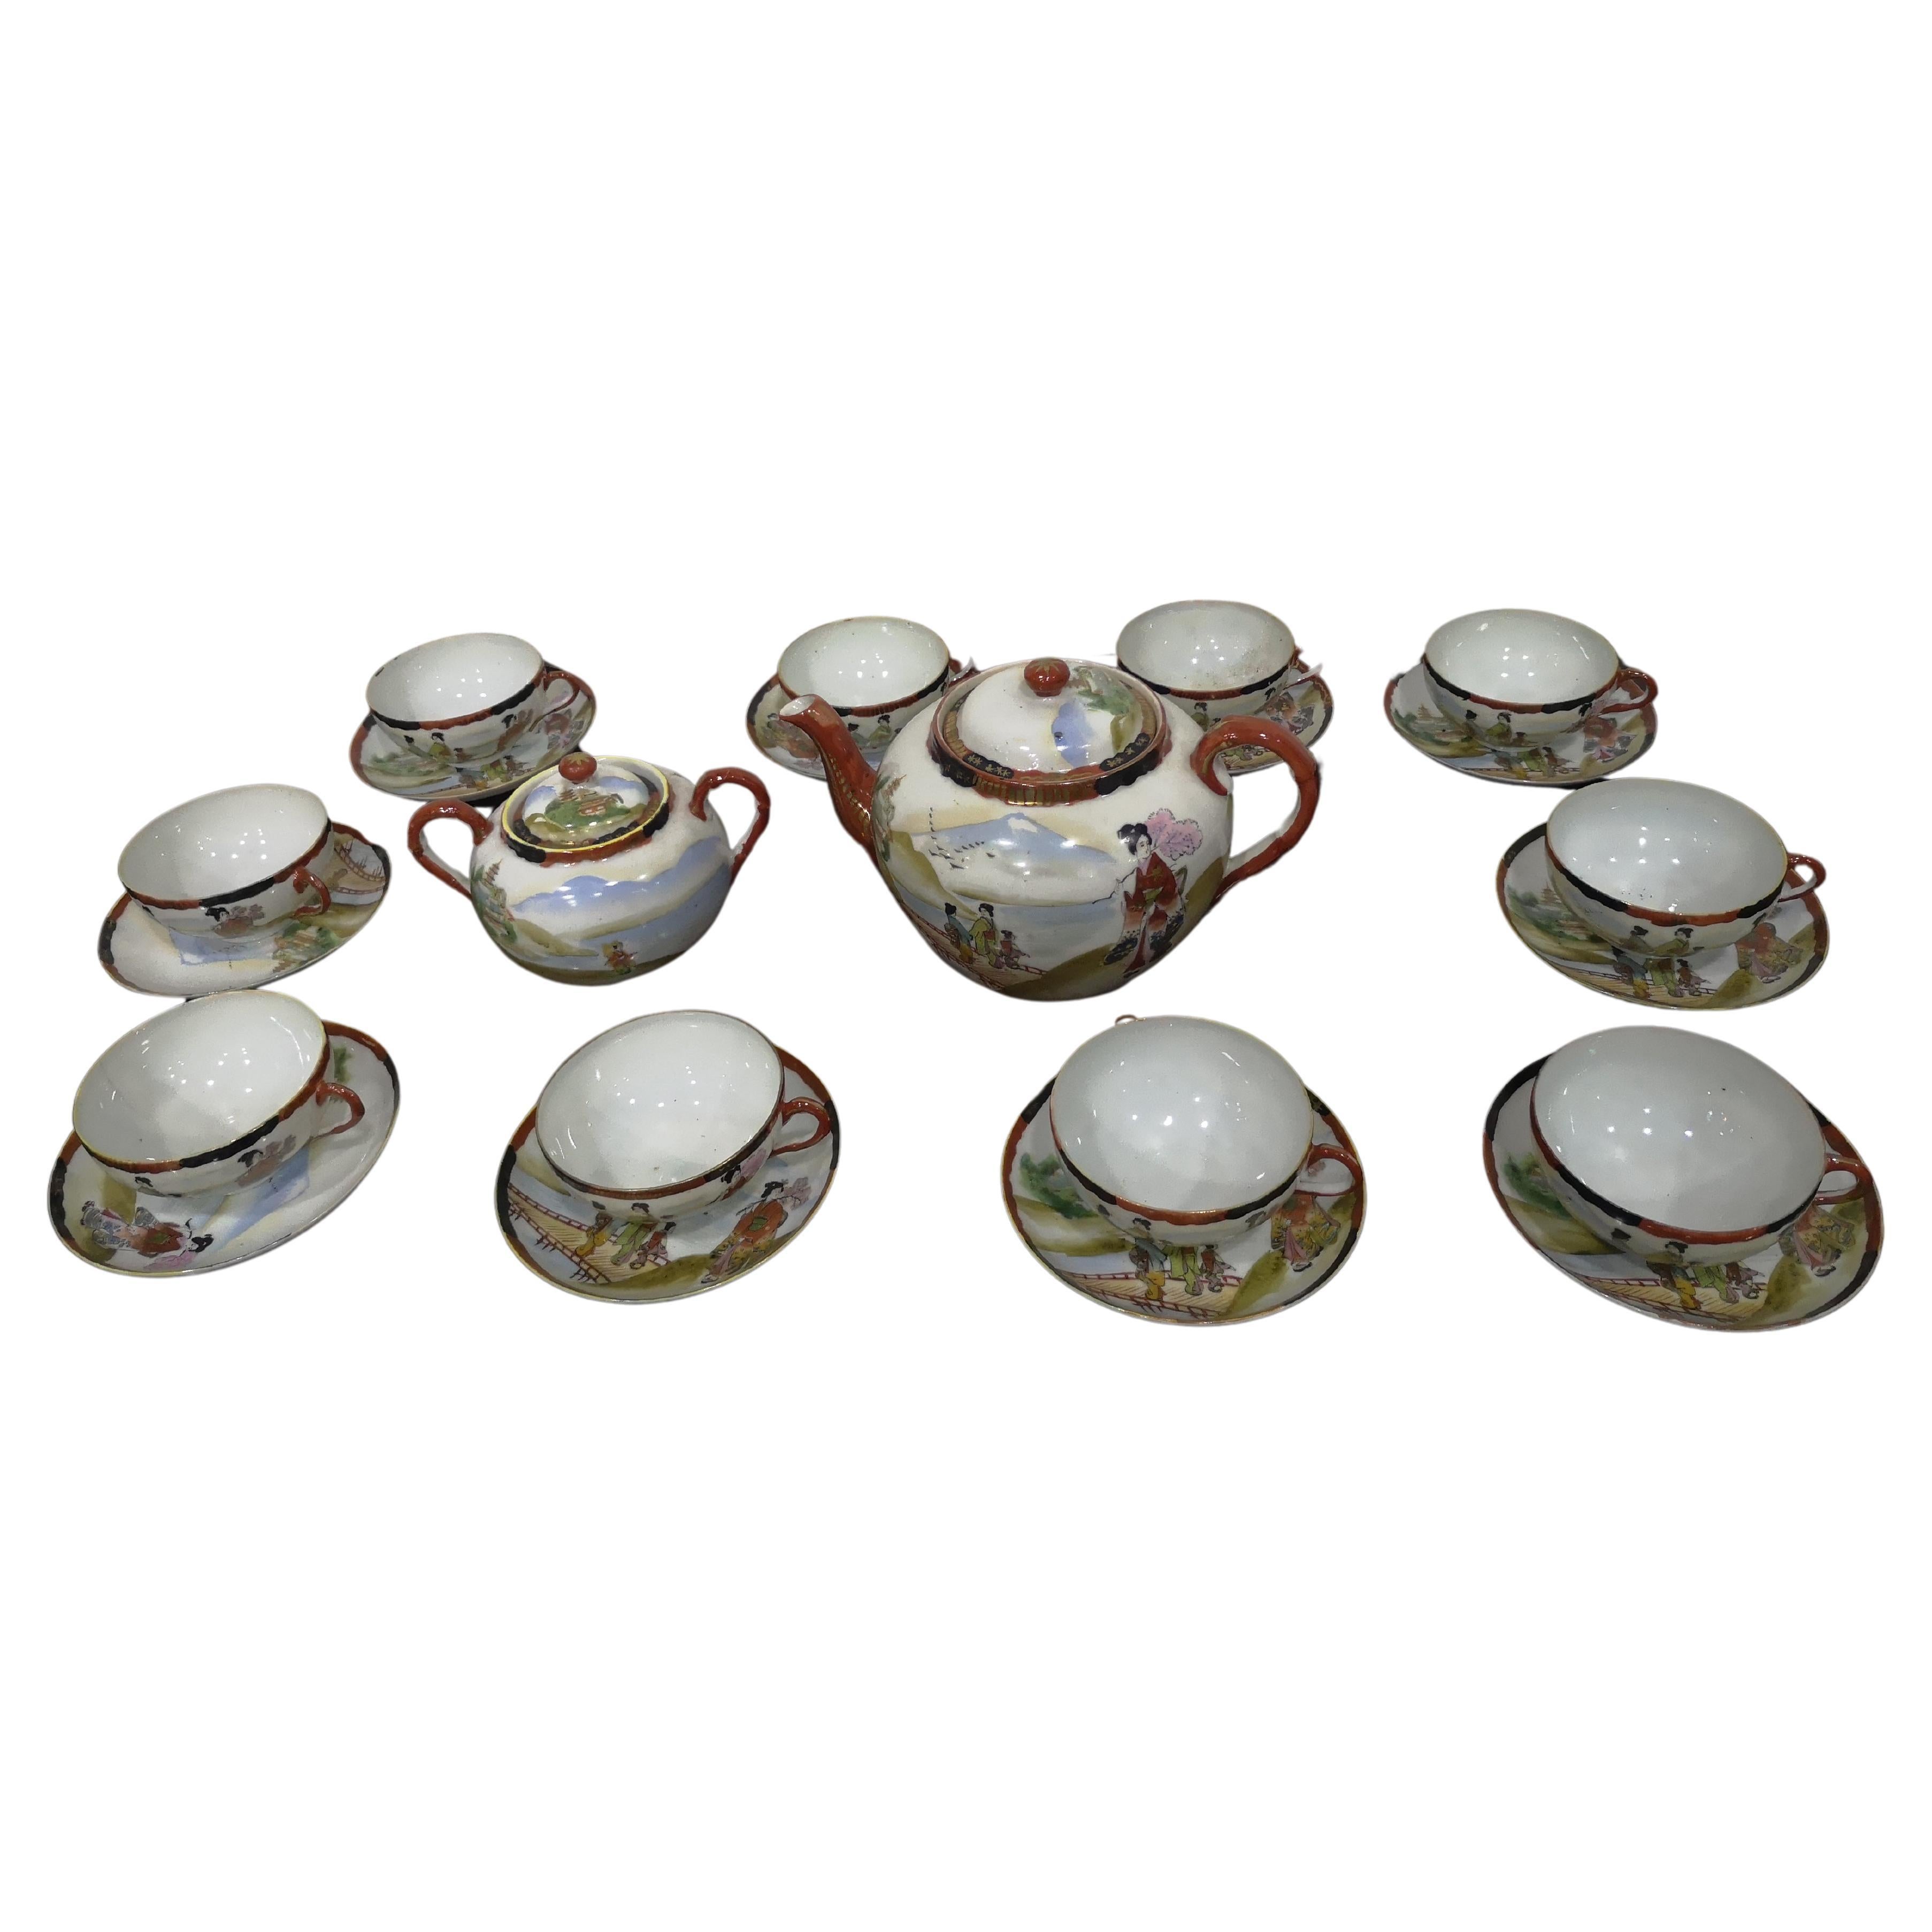 Japanese tea service for 10 in fine mid-19th century porcelain